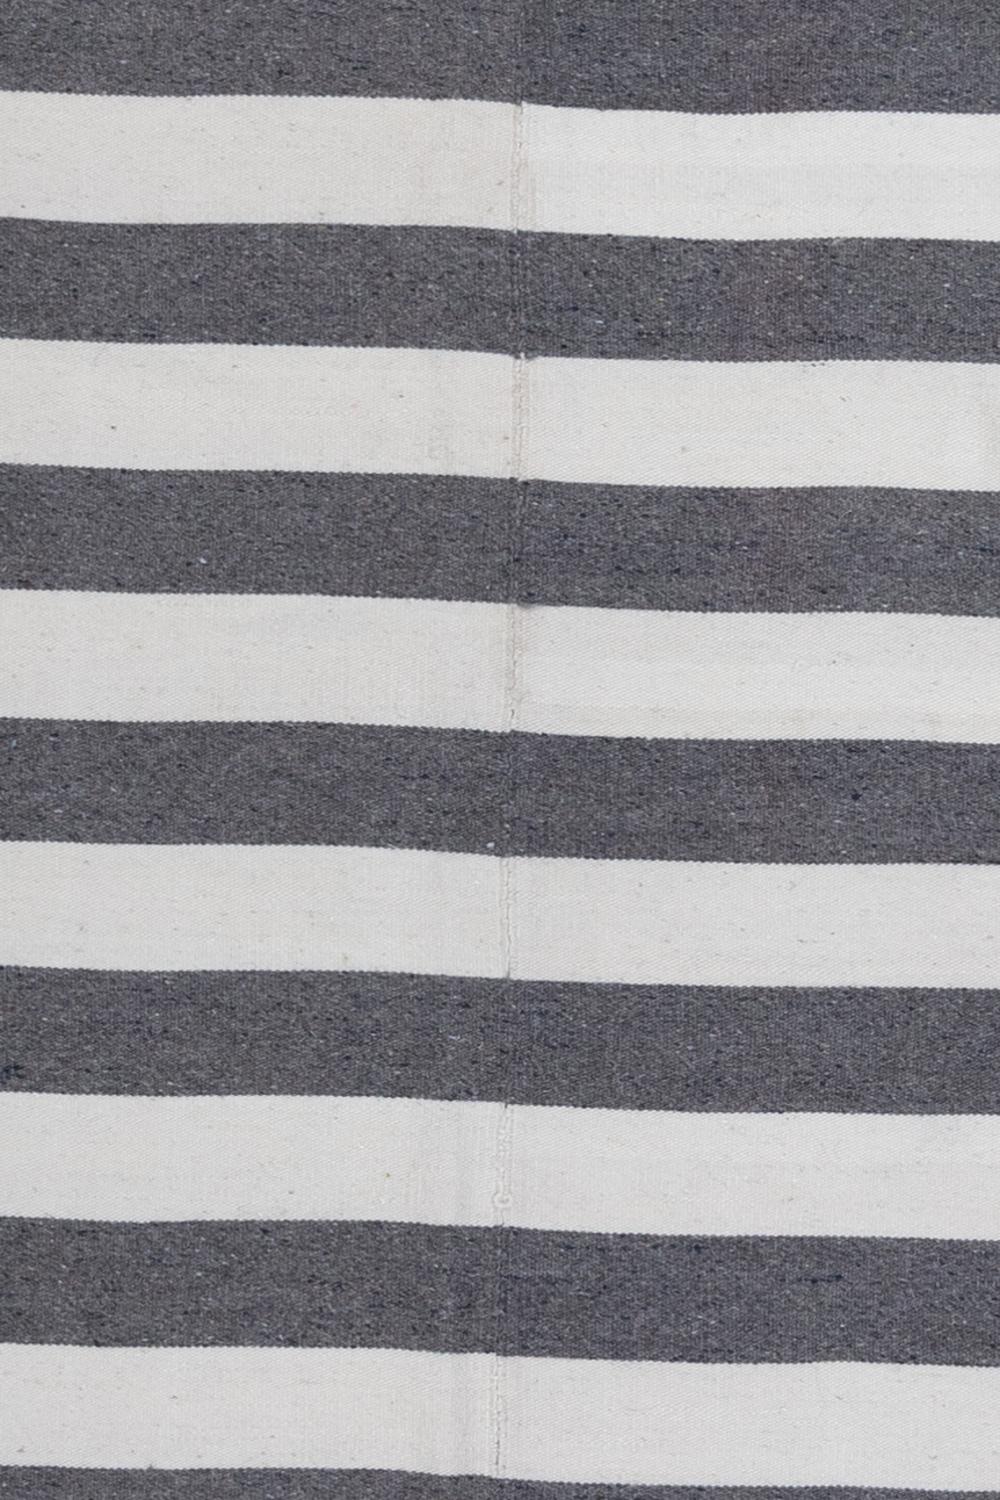 Age: New

Pile: flatweave

Wear Notes: 0

Material: wool

Flatwoven soft wool kilim in alternating gray and white stripes. Made by hand in Turkey.

Wear Guide:
Vintage and antique rugs are by nature, pre-loved and may show evidence of